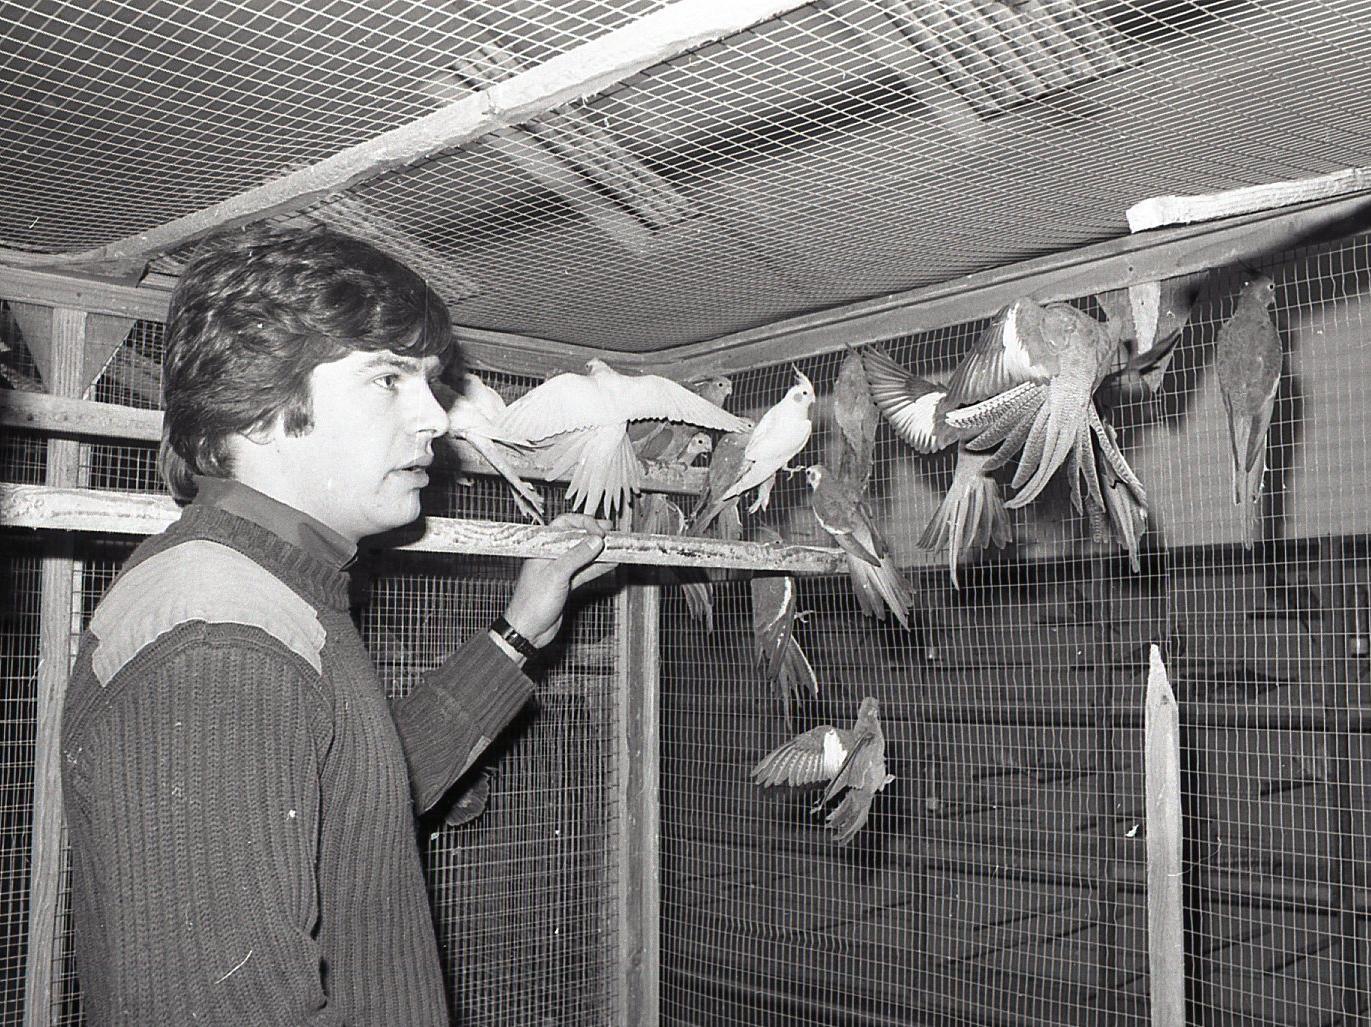 Christmas is coming... and the budgies on a Lancashire farm are getting fat. But there won't be any of these flighty types heading for the oven - for the budgies, parrots, quails, cockatiels and canaries at the Fylde Foreign Bird Farm at Blackpool are strictly for the eyes only. Pictured here is manager Nigel Wild with some of the parakeets